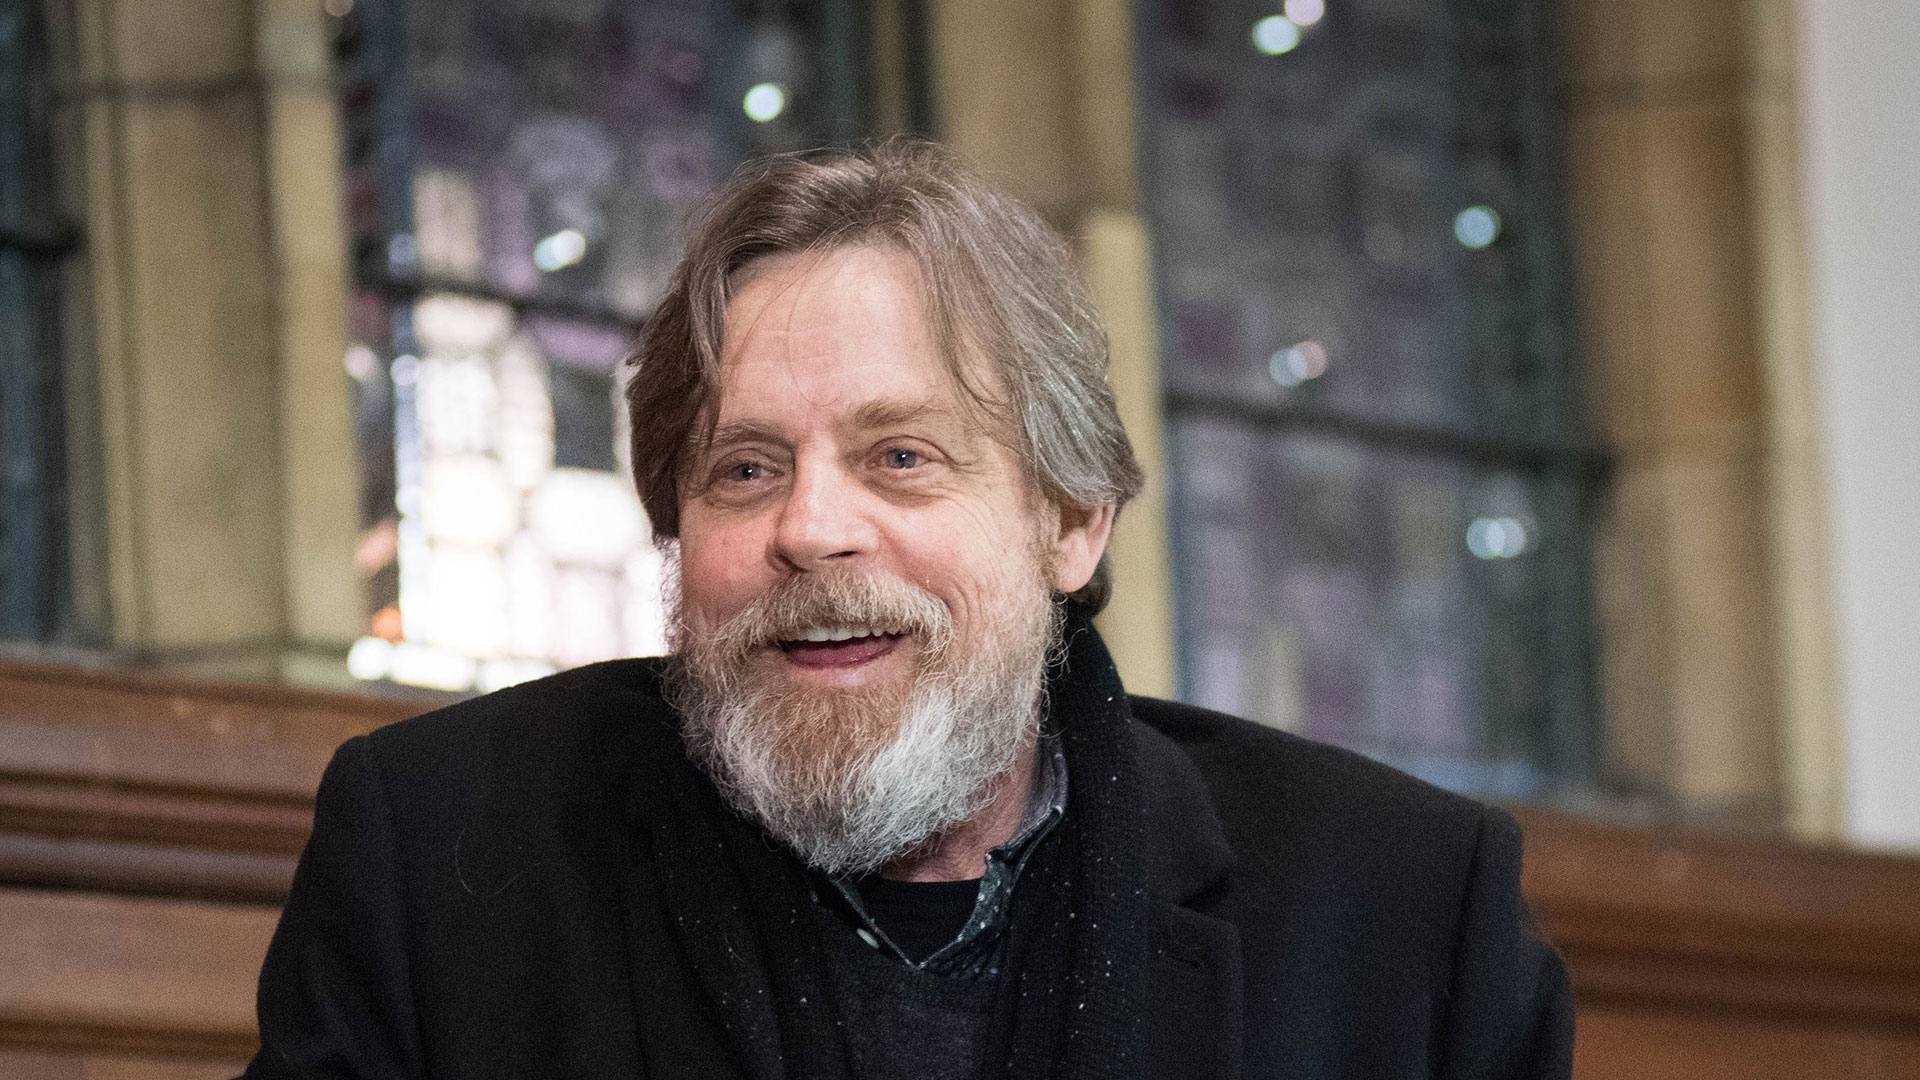 Our week with Mark Hamill: 